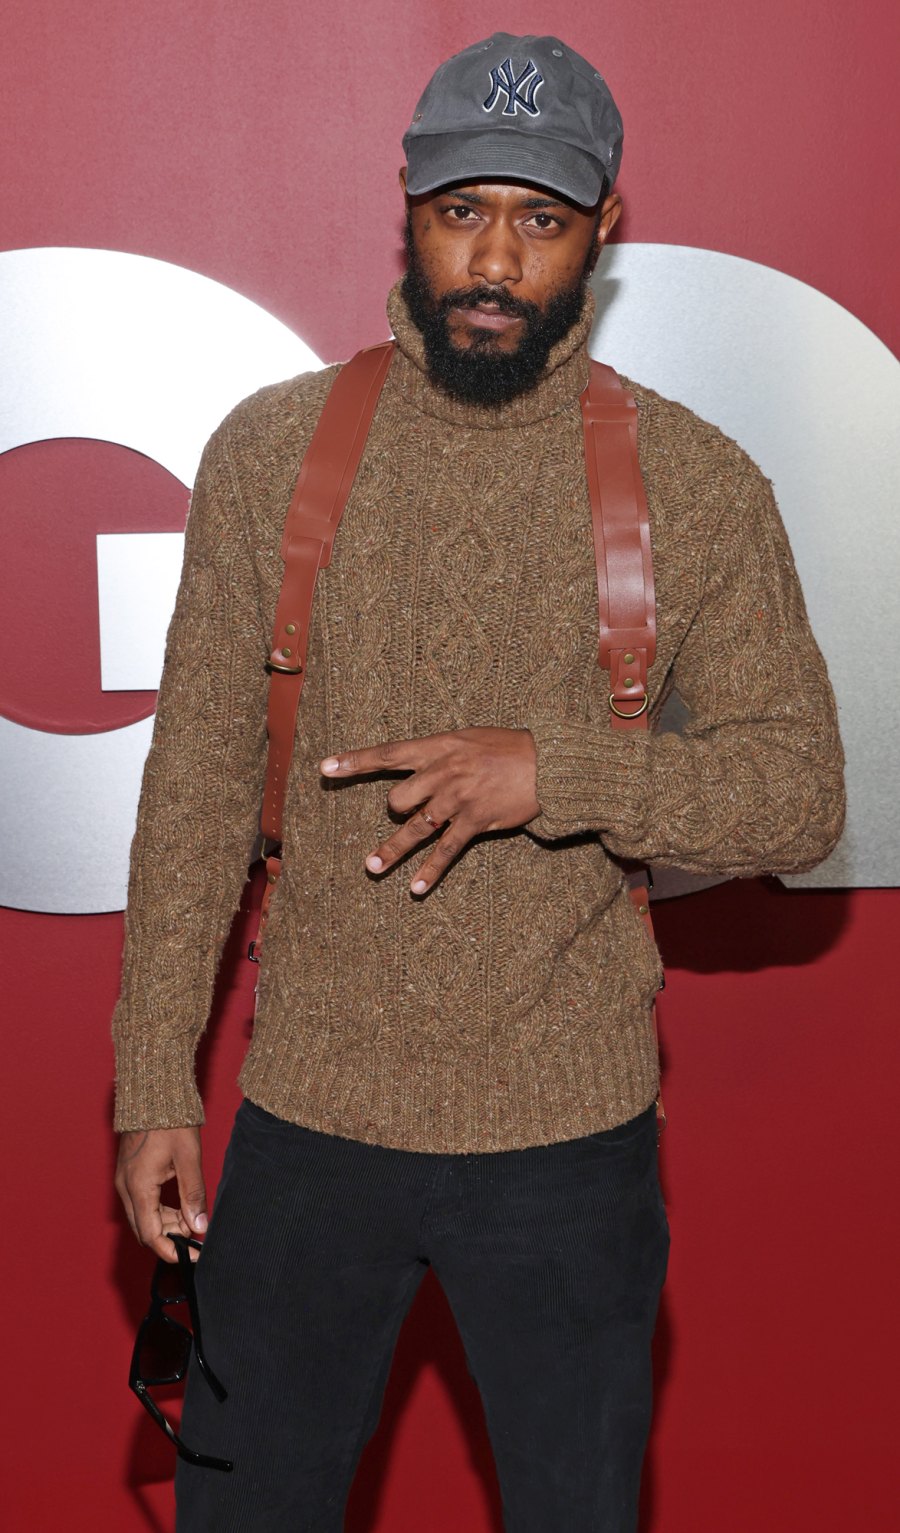 LaKeith Stanfield Celebrities Reveal Their Go-To Karaoke Songs